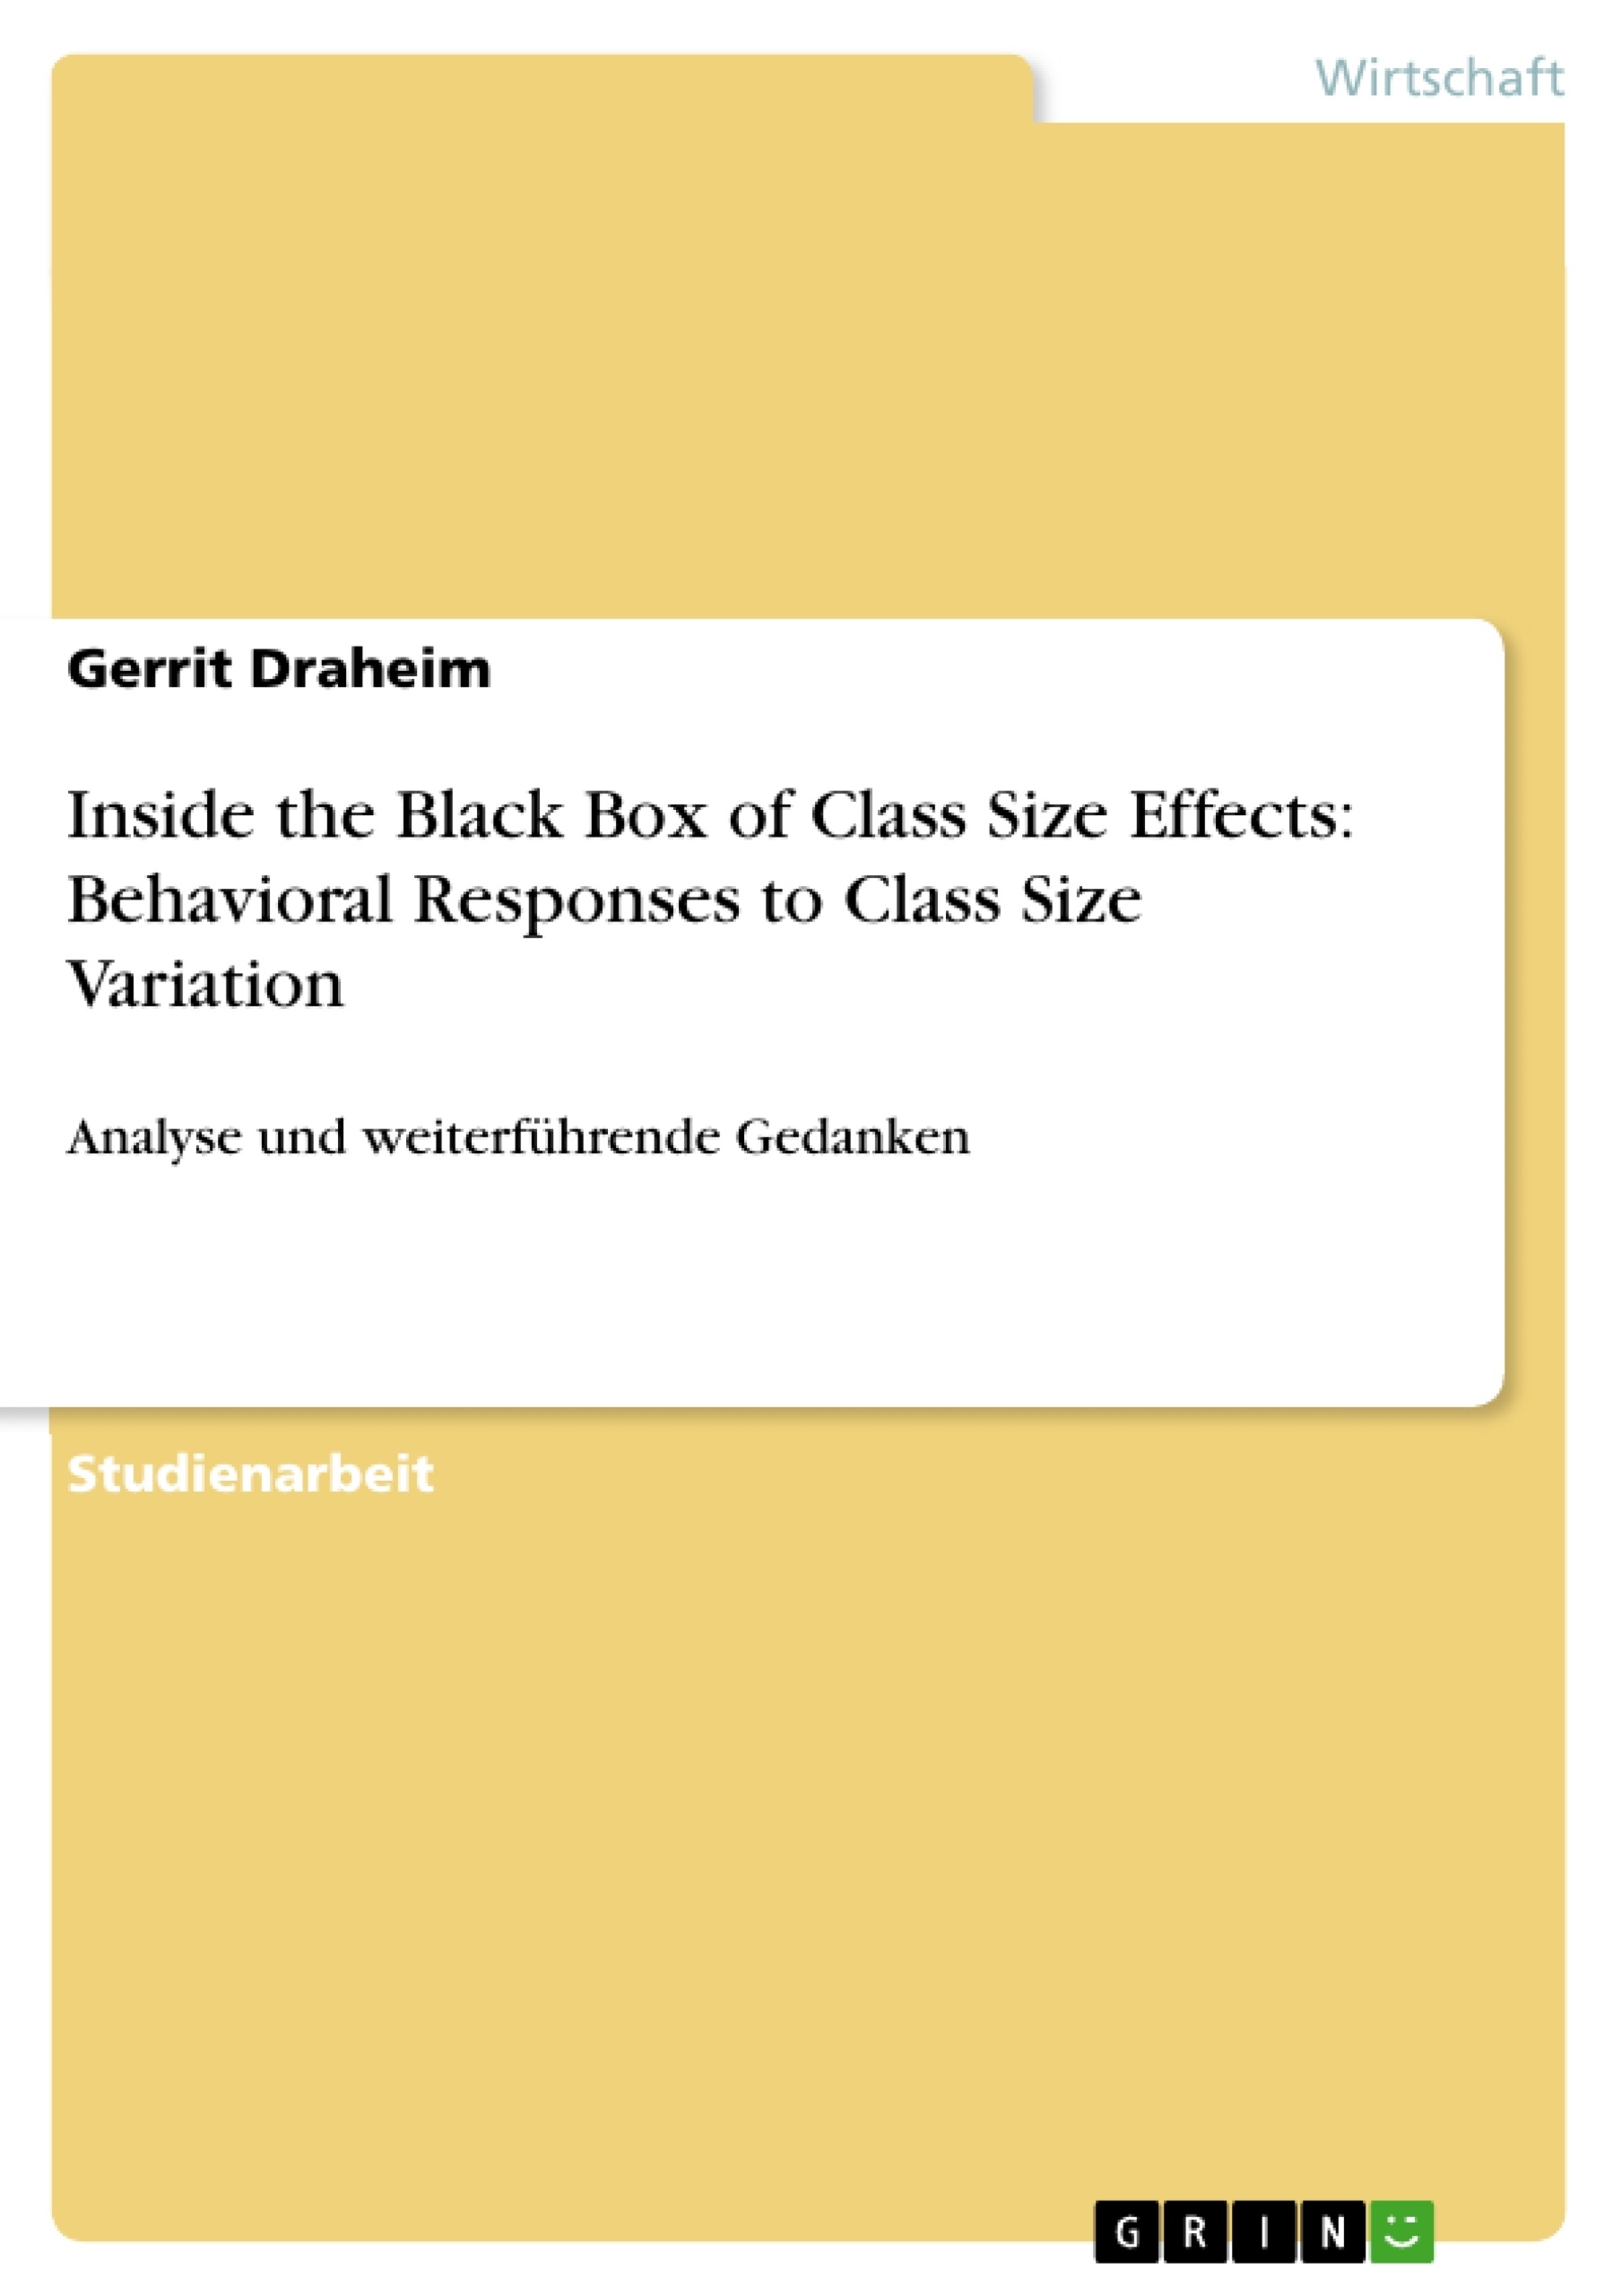 Title: Inside the Black Box of Class Size Effects: Behavioral Responses to Class Size Variation